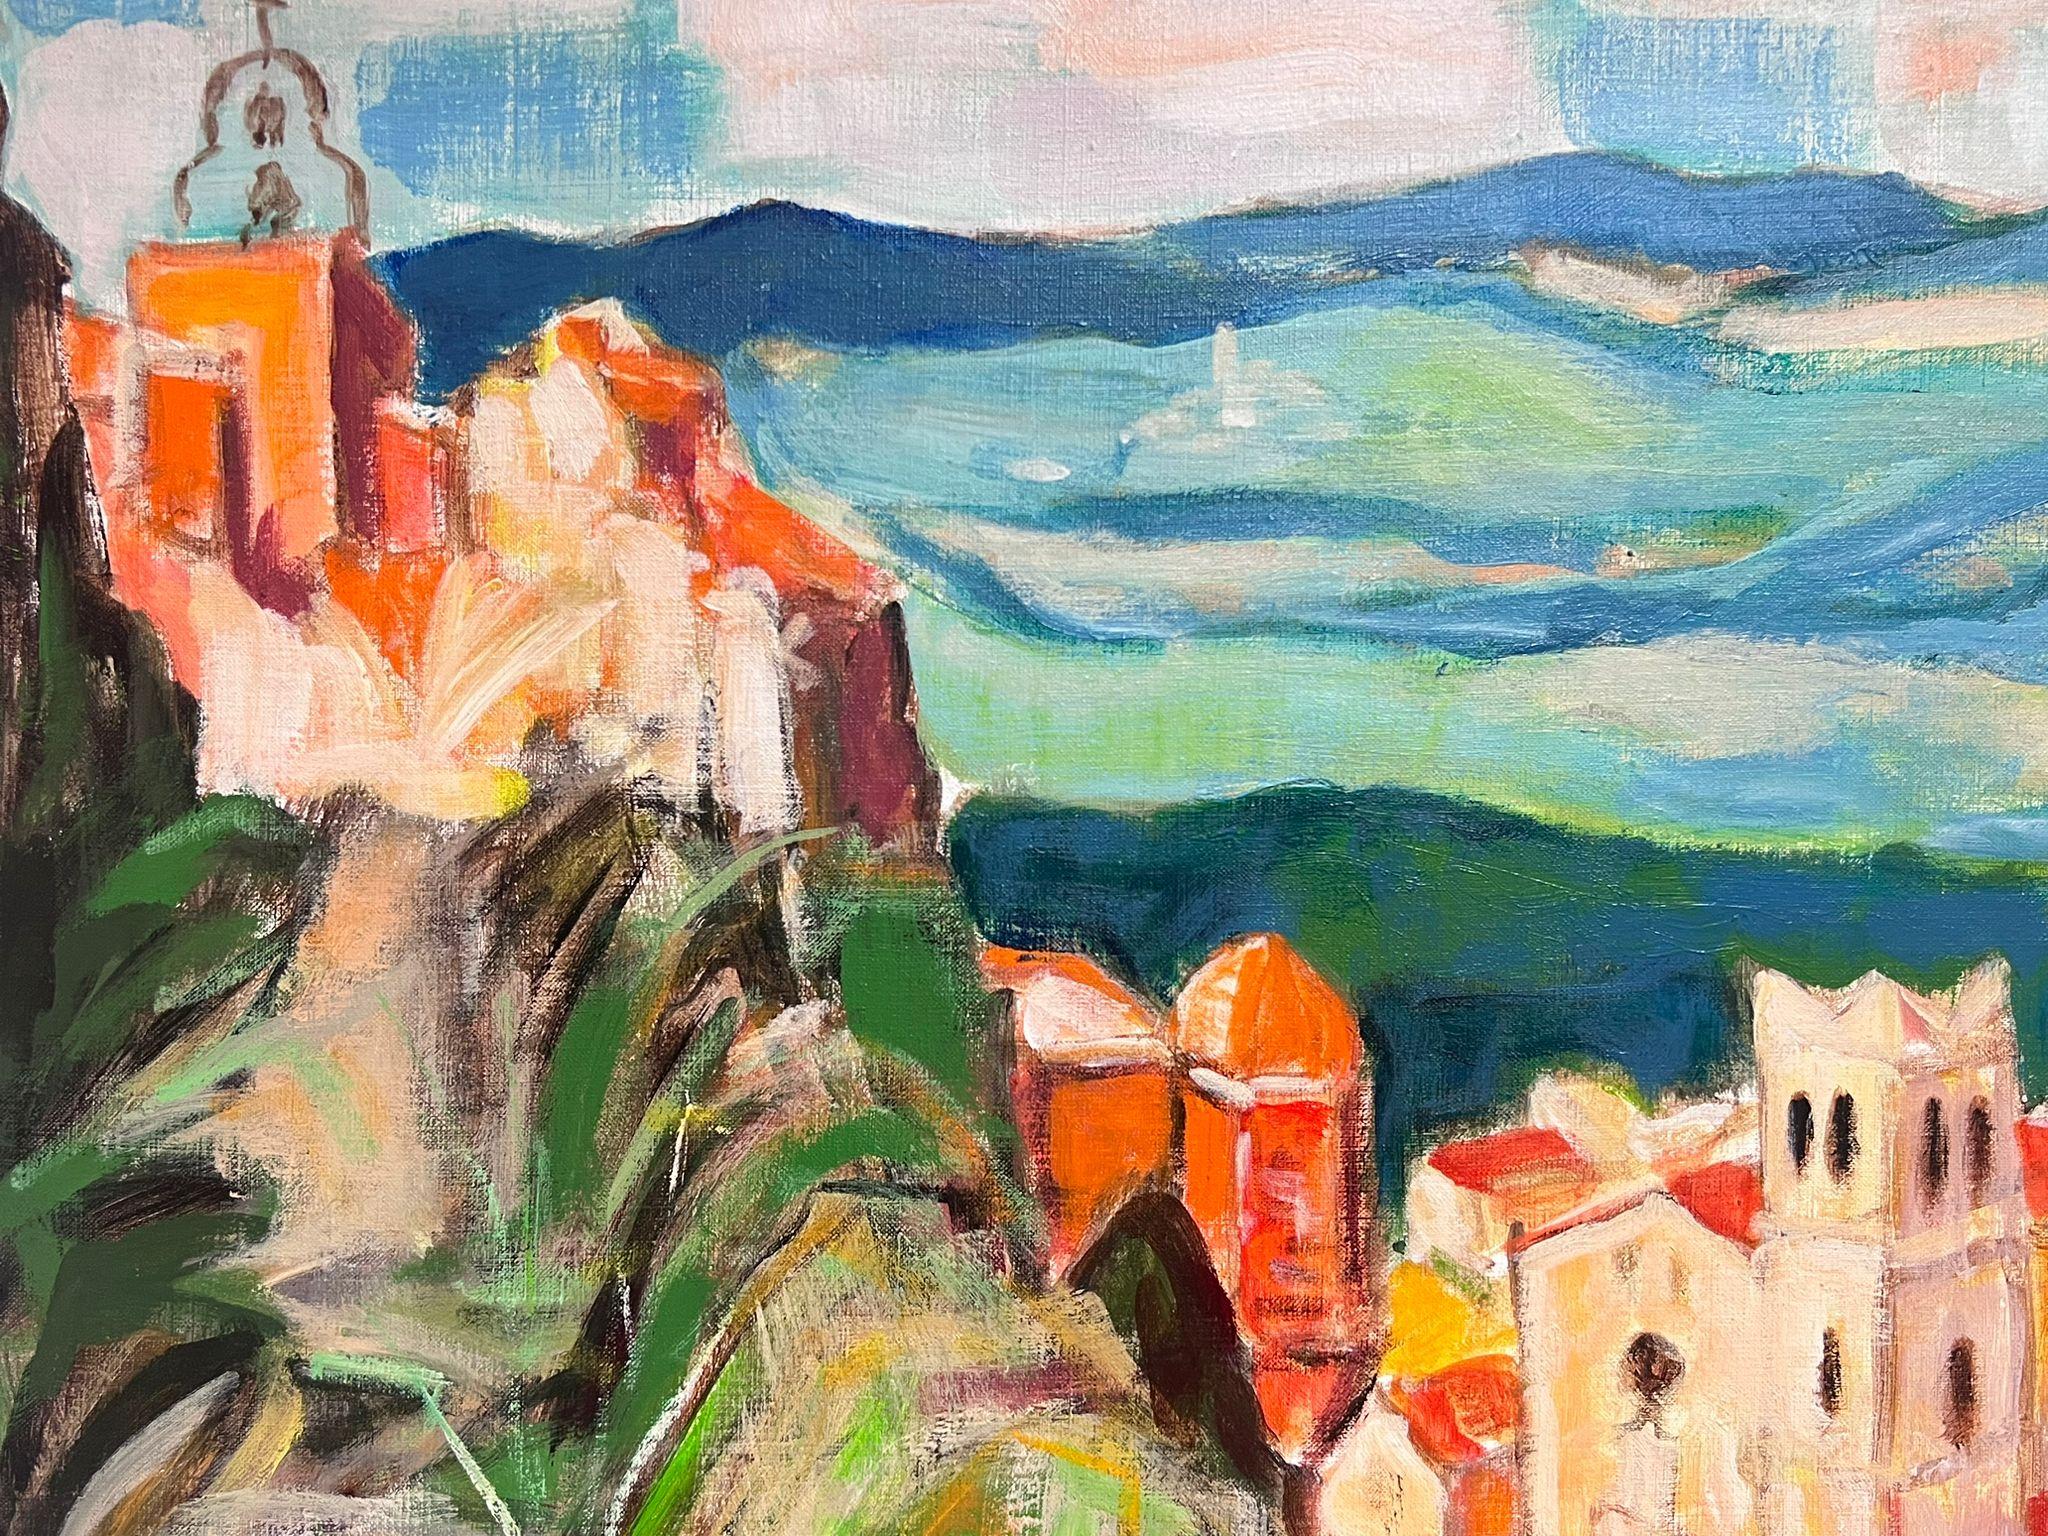 The Provencal Landscape 
by Michel Kritz (French 1925-1994)
oil on canvas, unframed
canvas: 24 x 32 inches
provenance: private collection, France
condition: very good and sound condition  